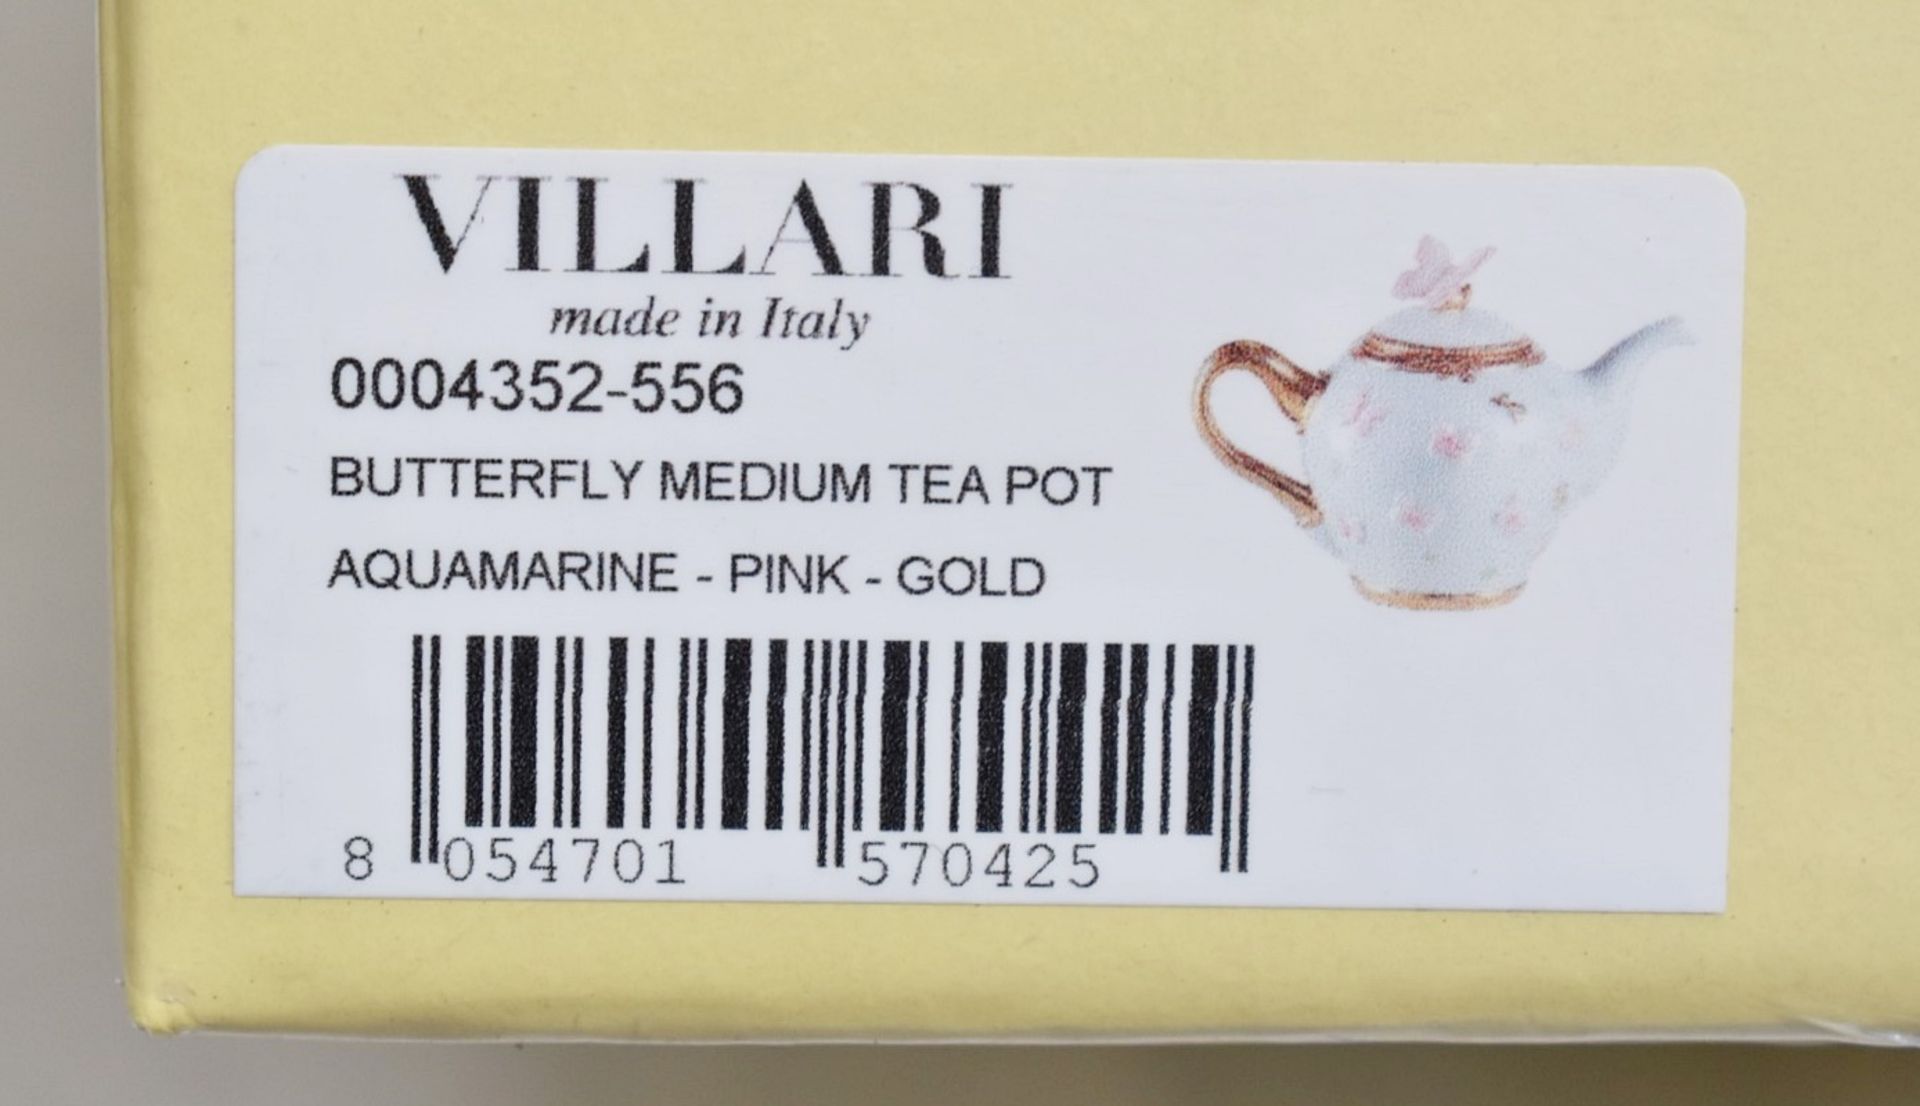 1 x VILLARI Hand-crafted Luxury Italian Porcelain Butterfly Tea Pot - Sealed/Boxed - RRP £365.00 - Image 3 of 4